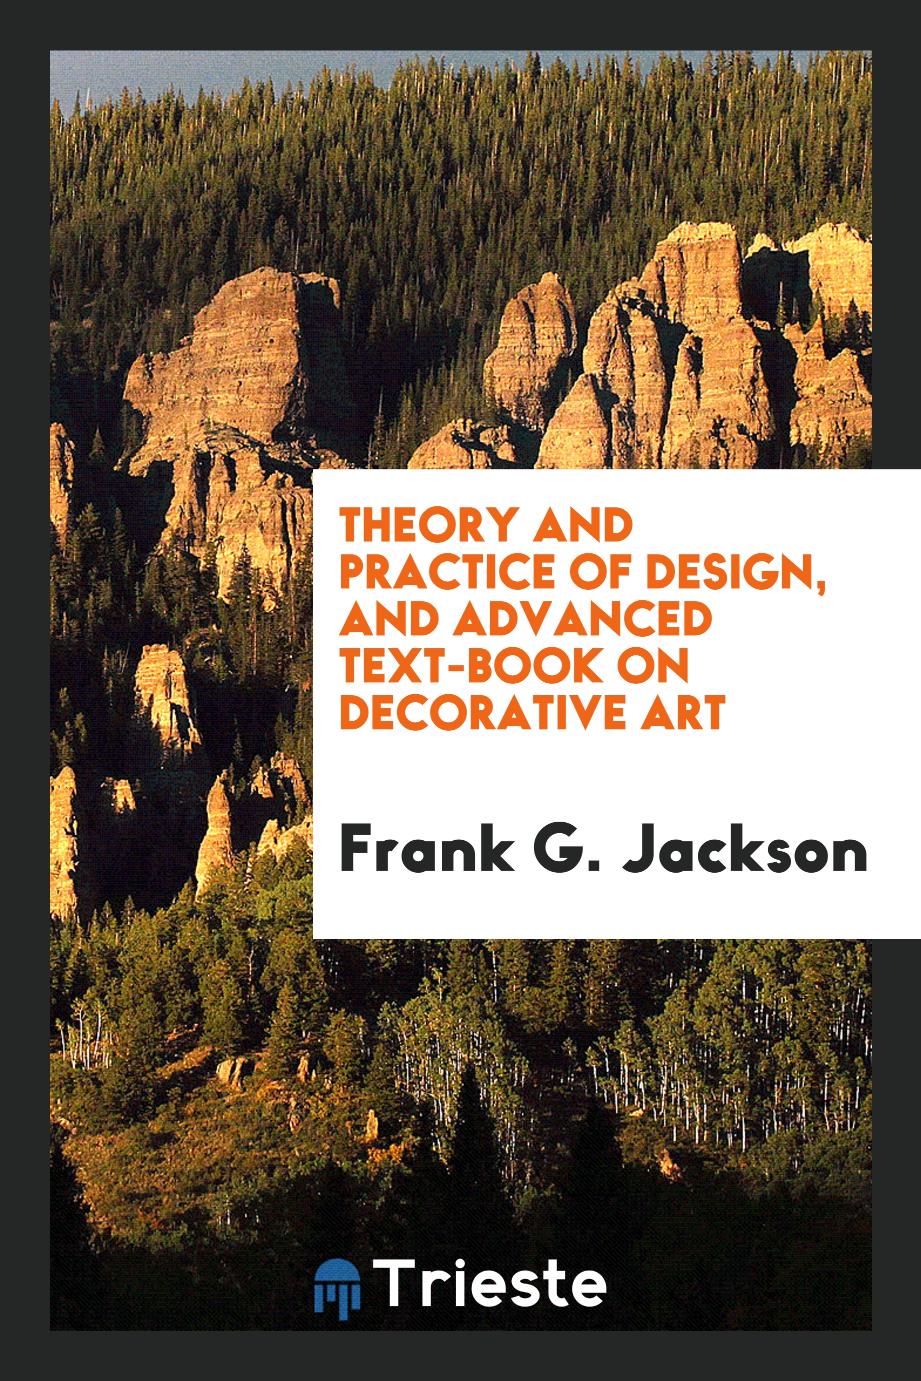 Theory and Practice of Design, and Advanced Text-book on Decorative Art